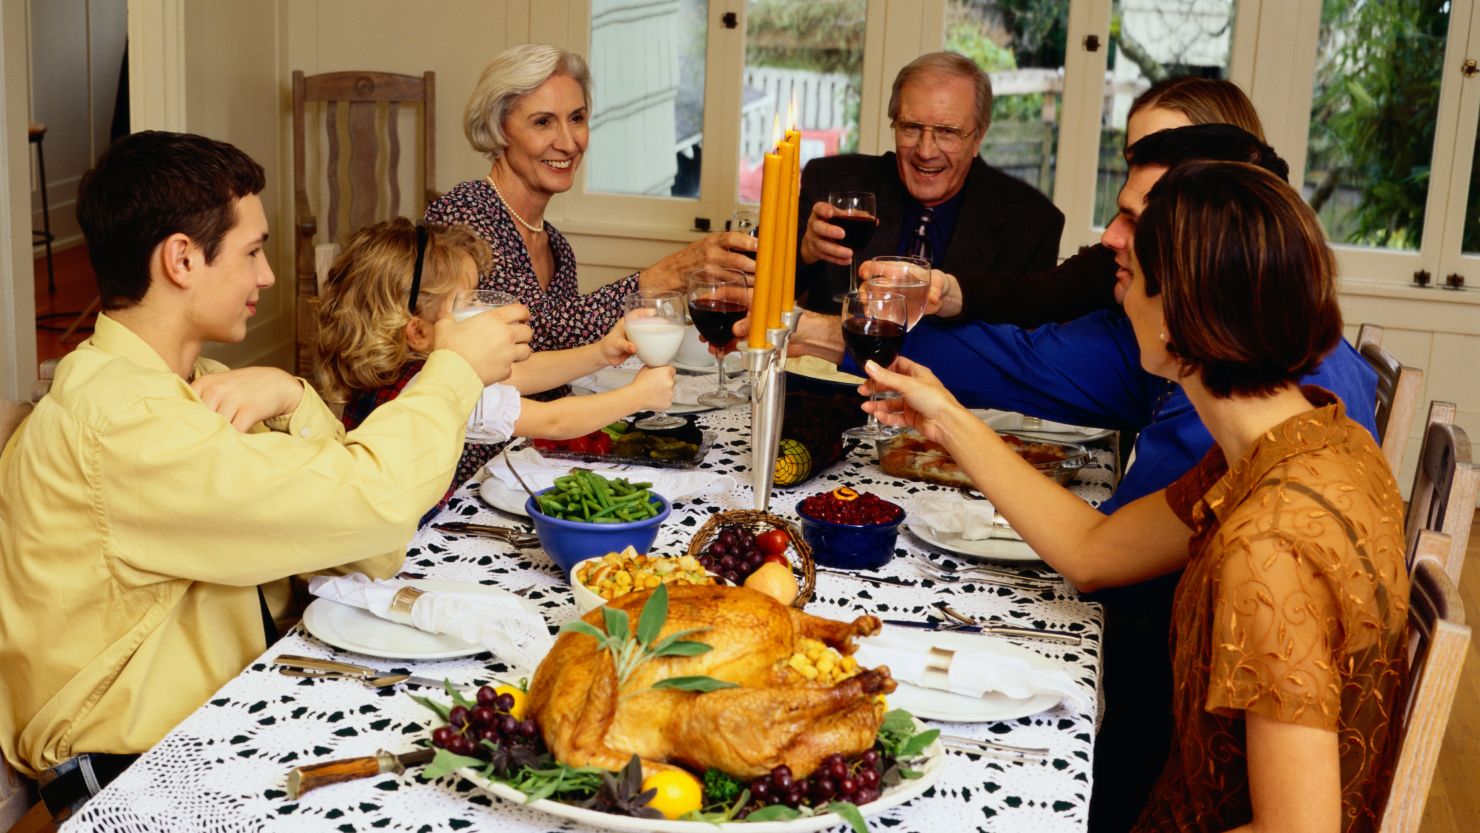 Thanksgiving can be a time for families to talk, but discussions about race can be hard at get-togethers.